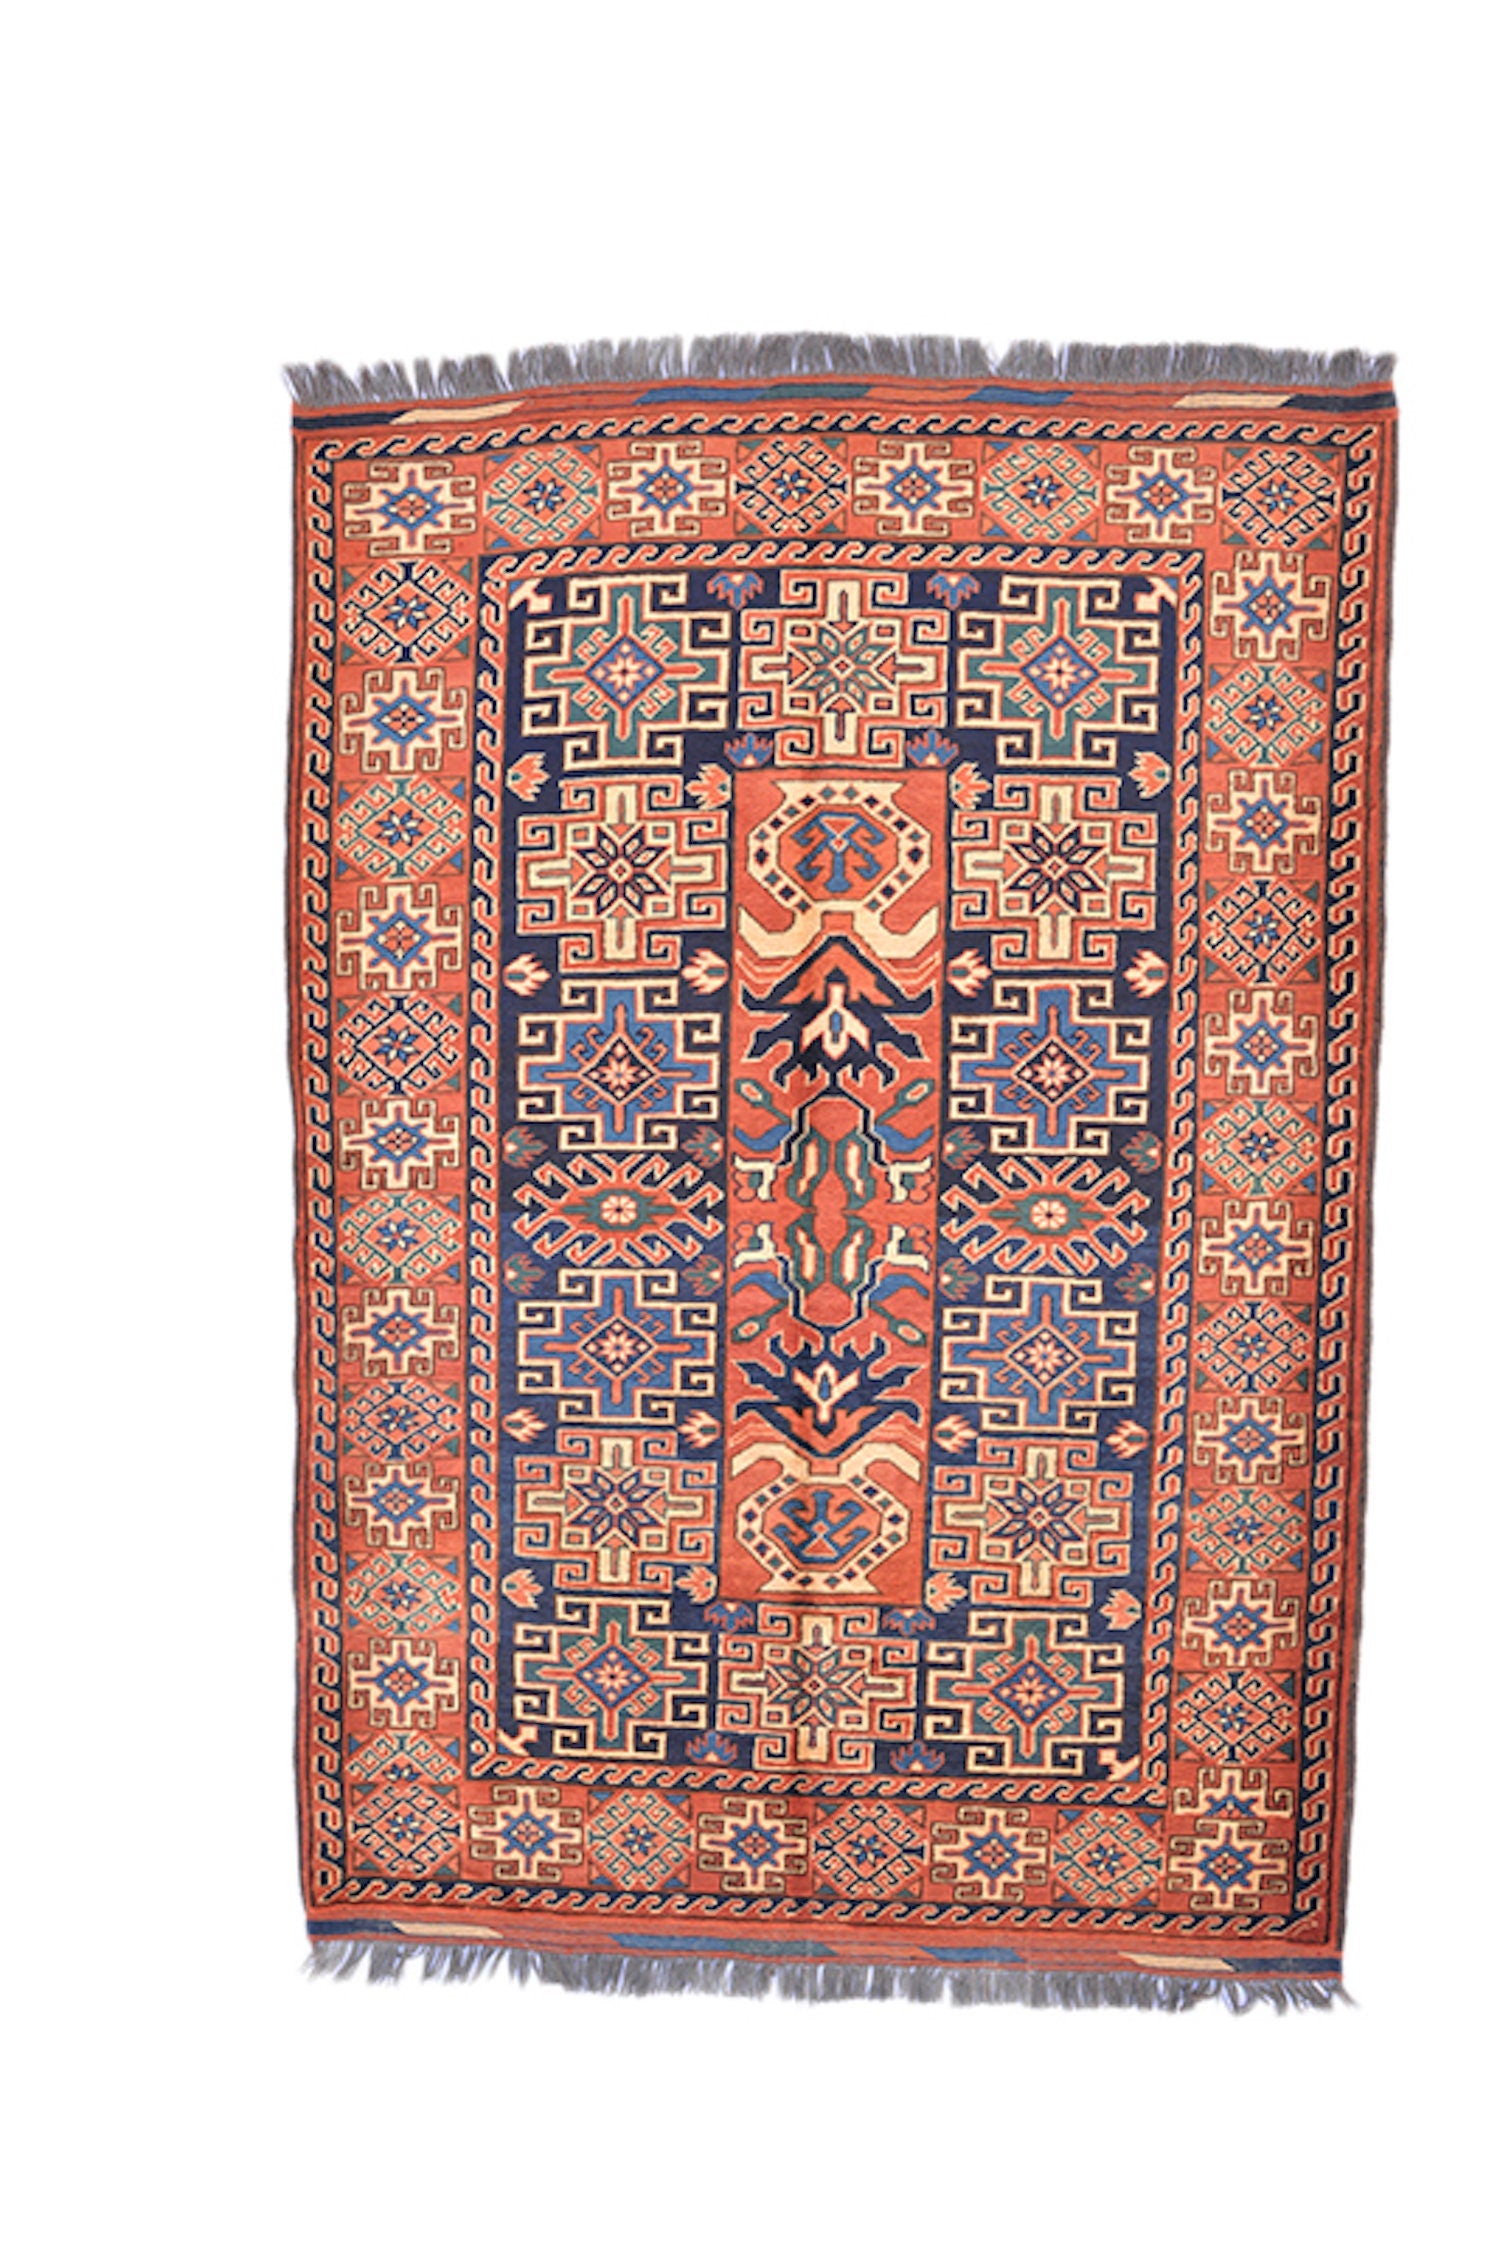 Size: 5.9 x 4.1 ft , Tribal Rusted Orange Blue Area Rug, Grid Tribal Pattern, Wool Antique Persian Rug